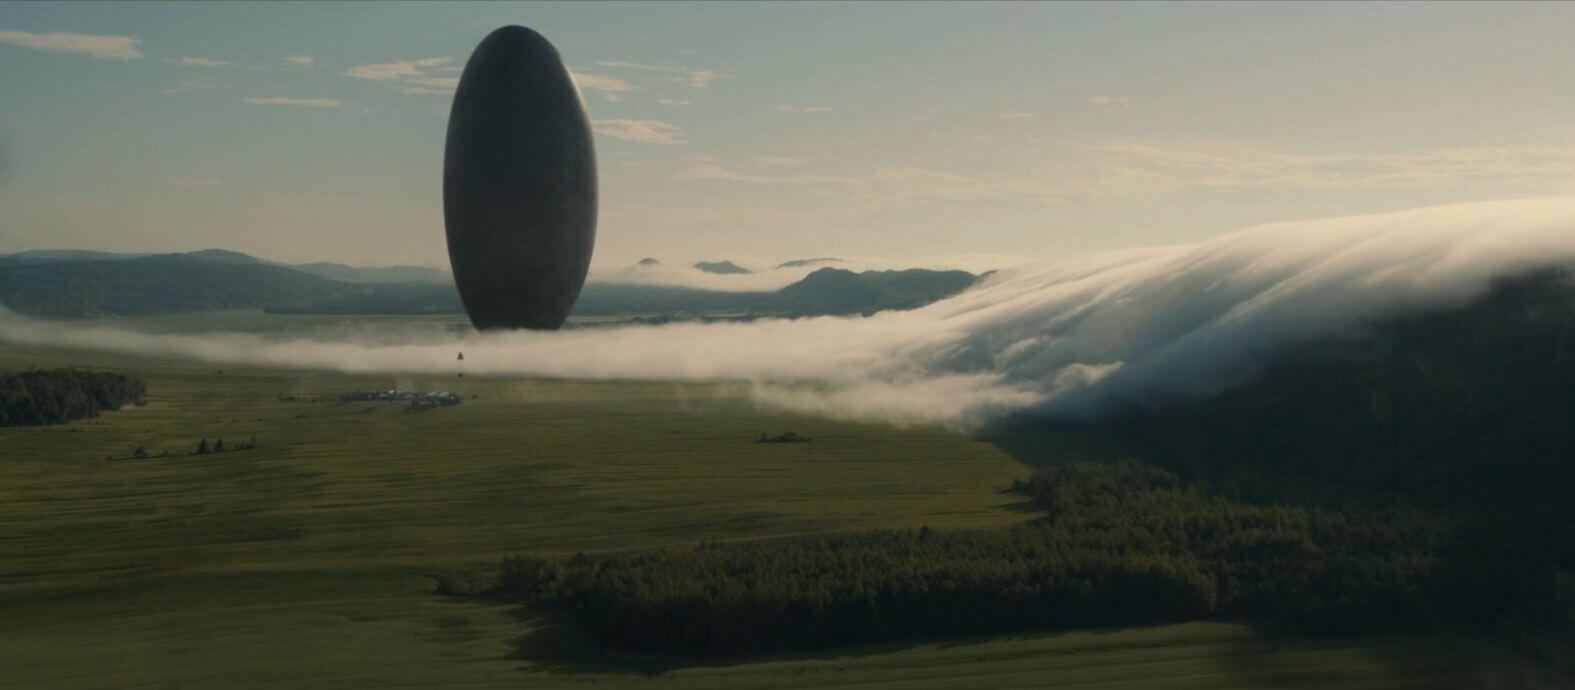 Arrival Amy Adams Jeremy Renner Forest Whitaker